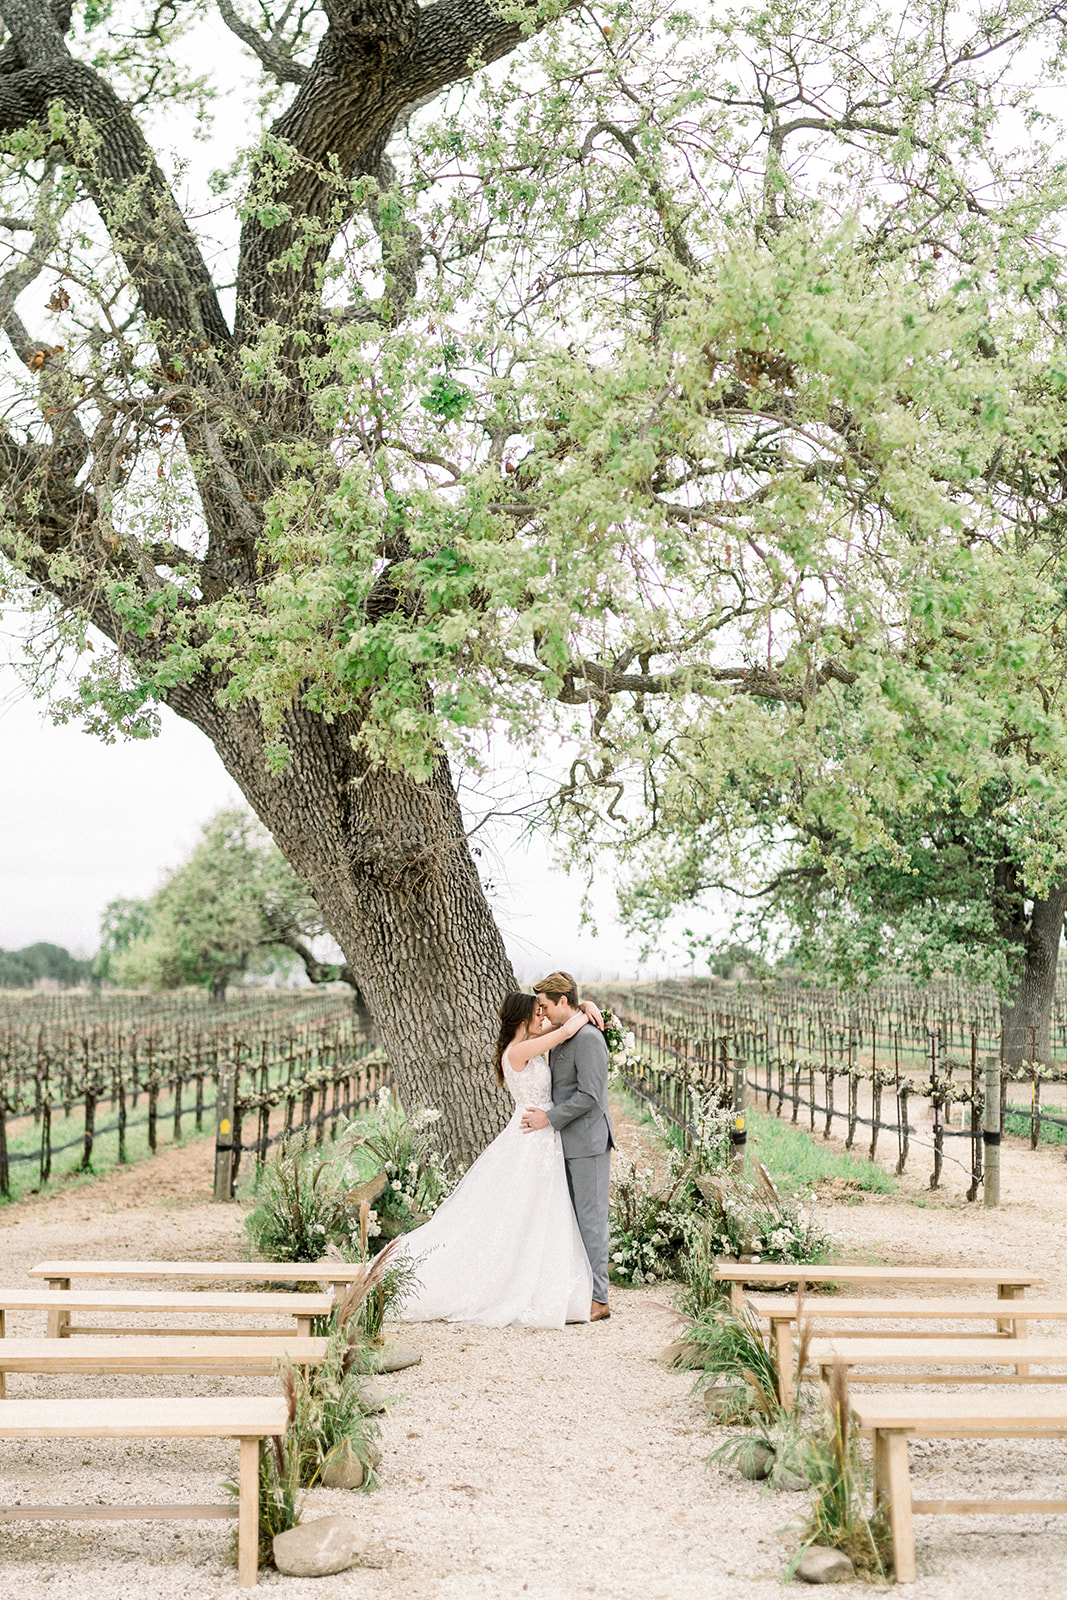 Luxurious Sunstone Winery wedding ceremony setup with with Southern California's oak trees framing the aisle.